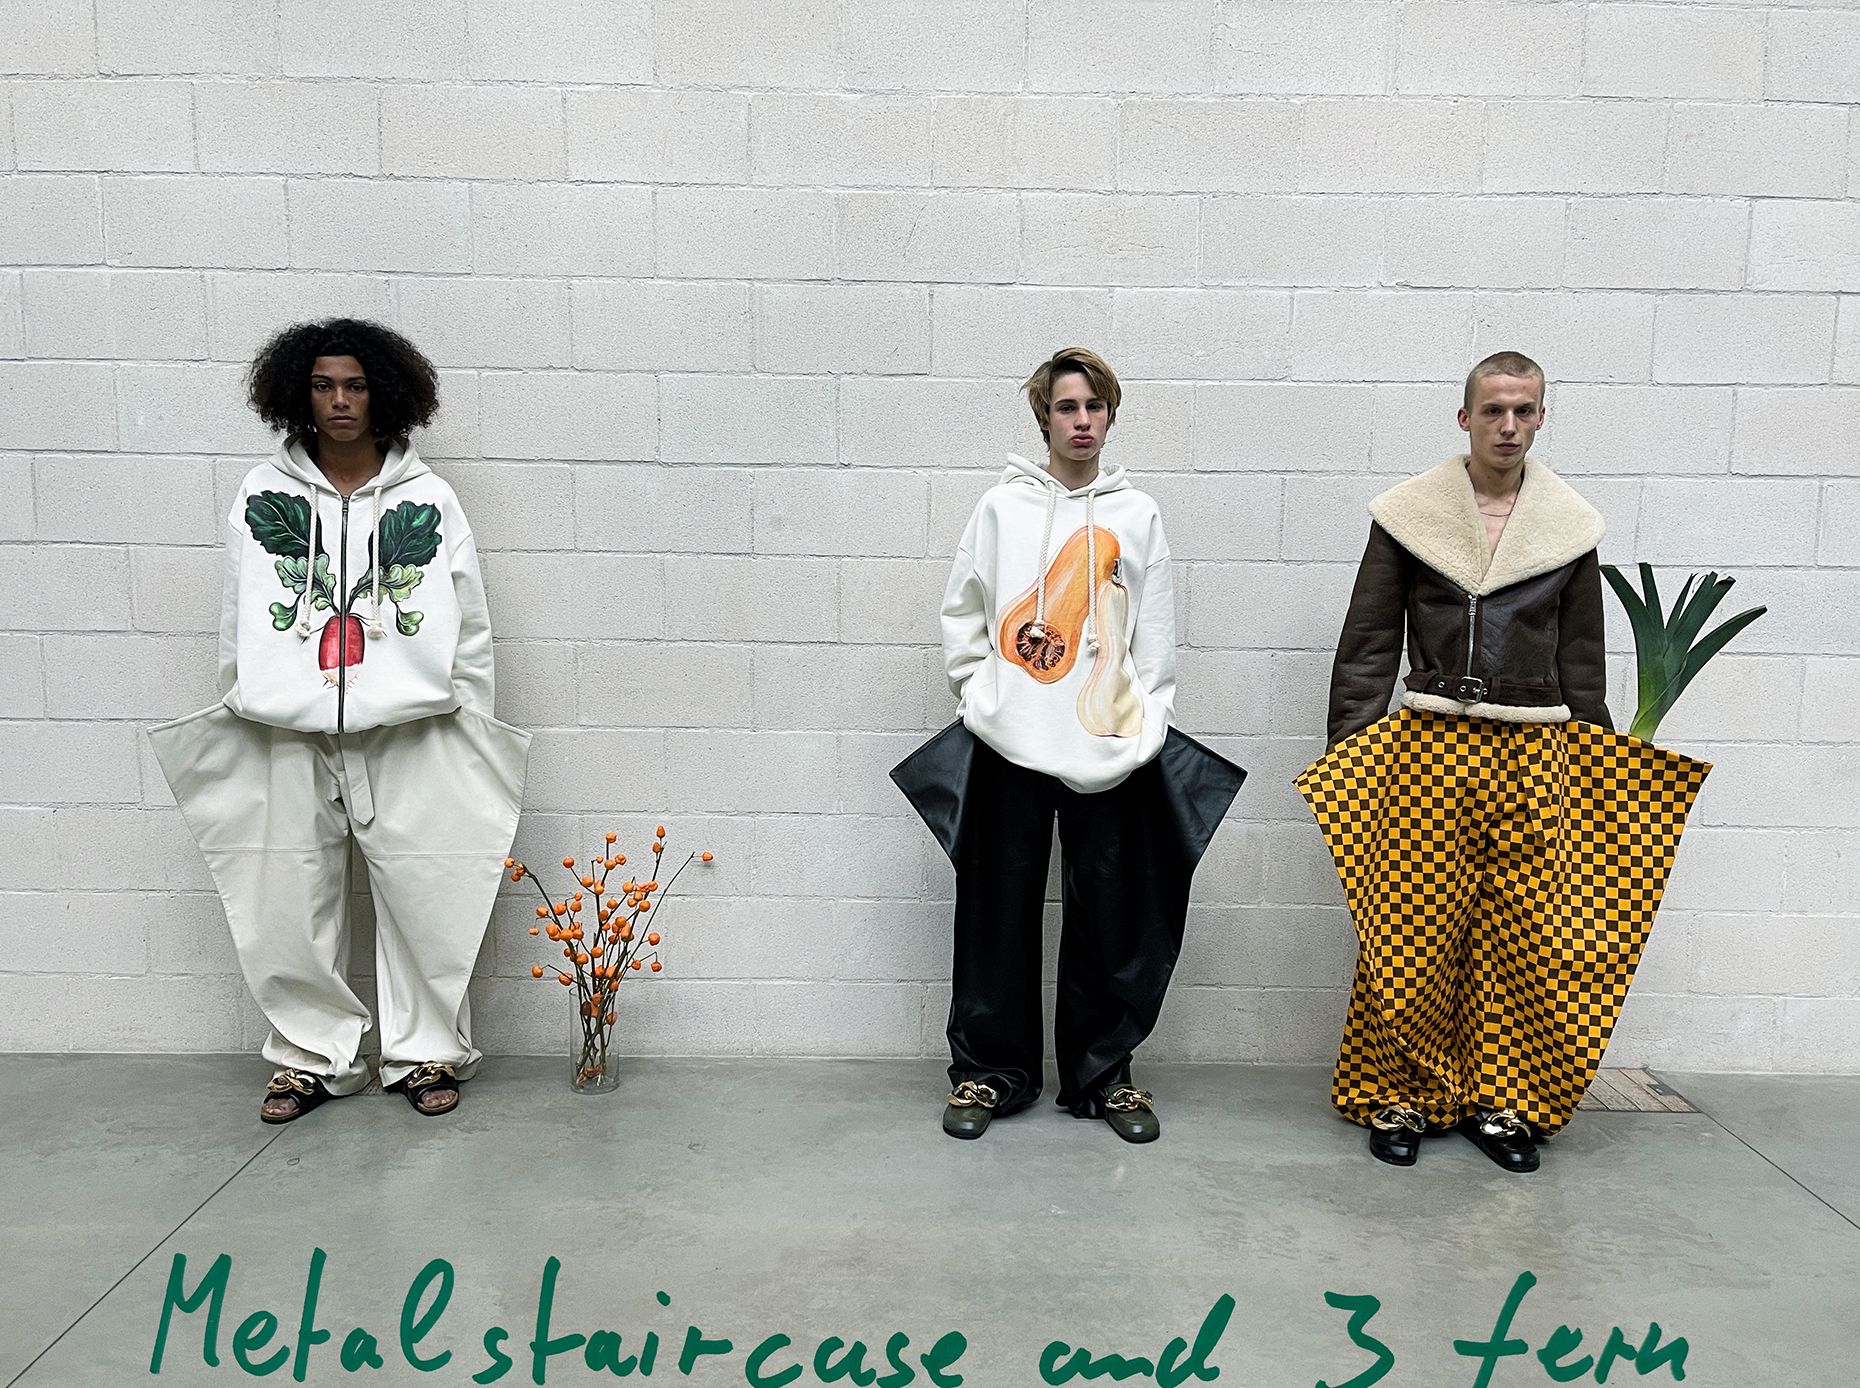 JW Anderson and his creative showroom choices